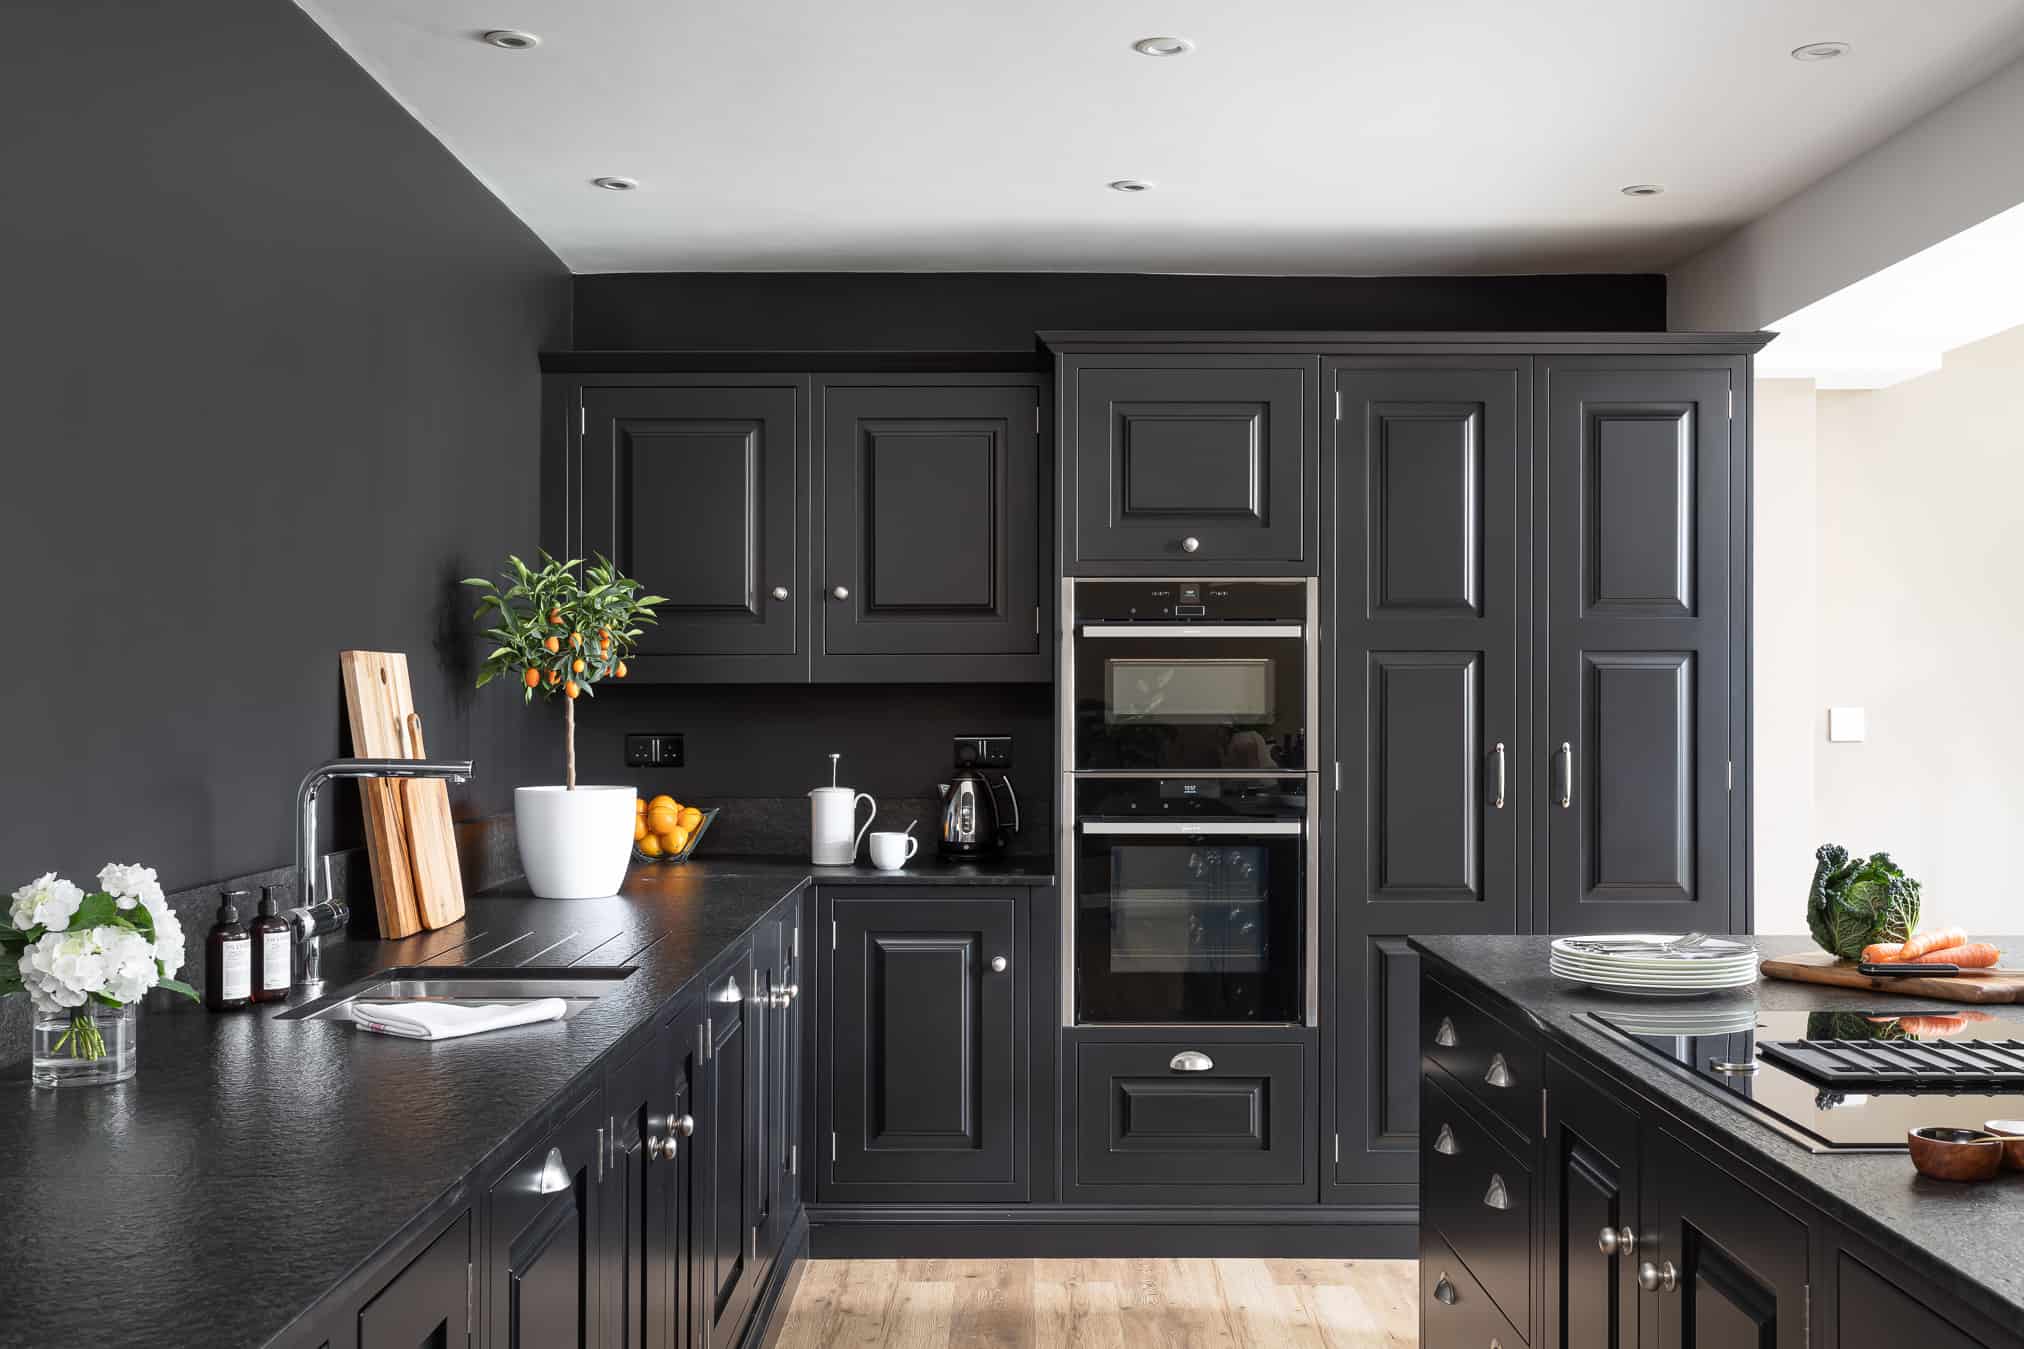 Stunning Black Kitchens for Your Luxury Home